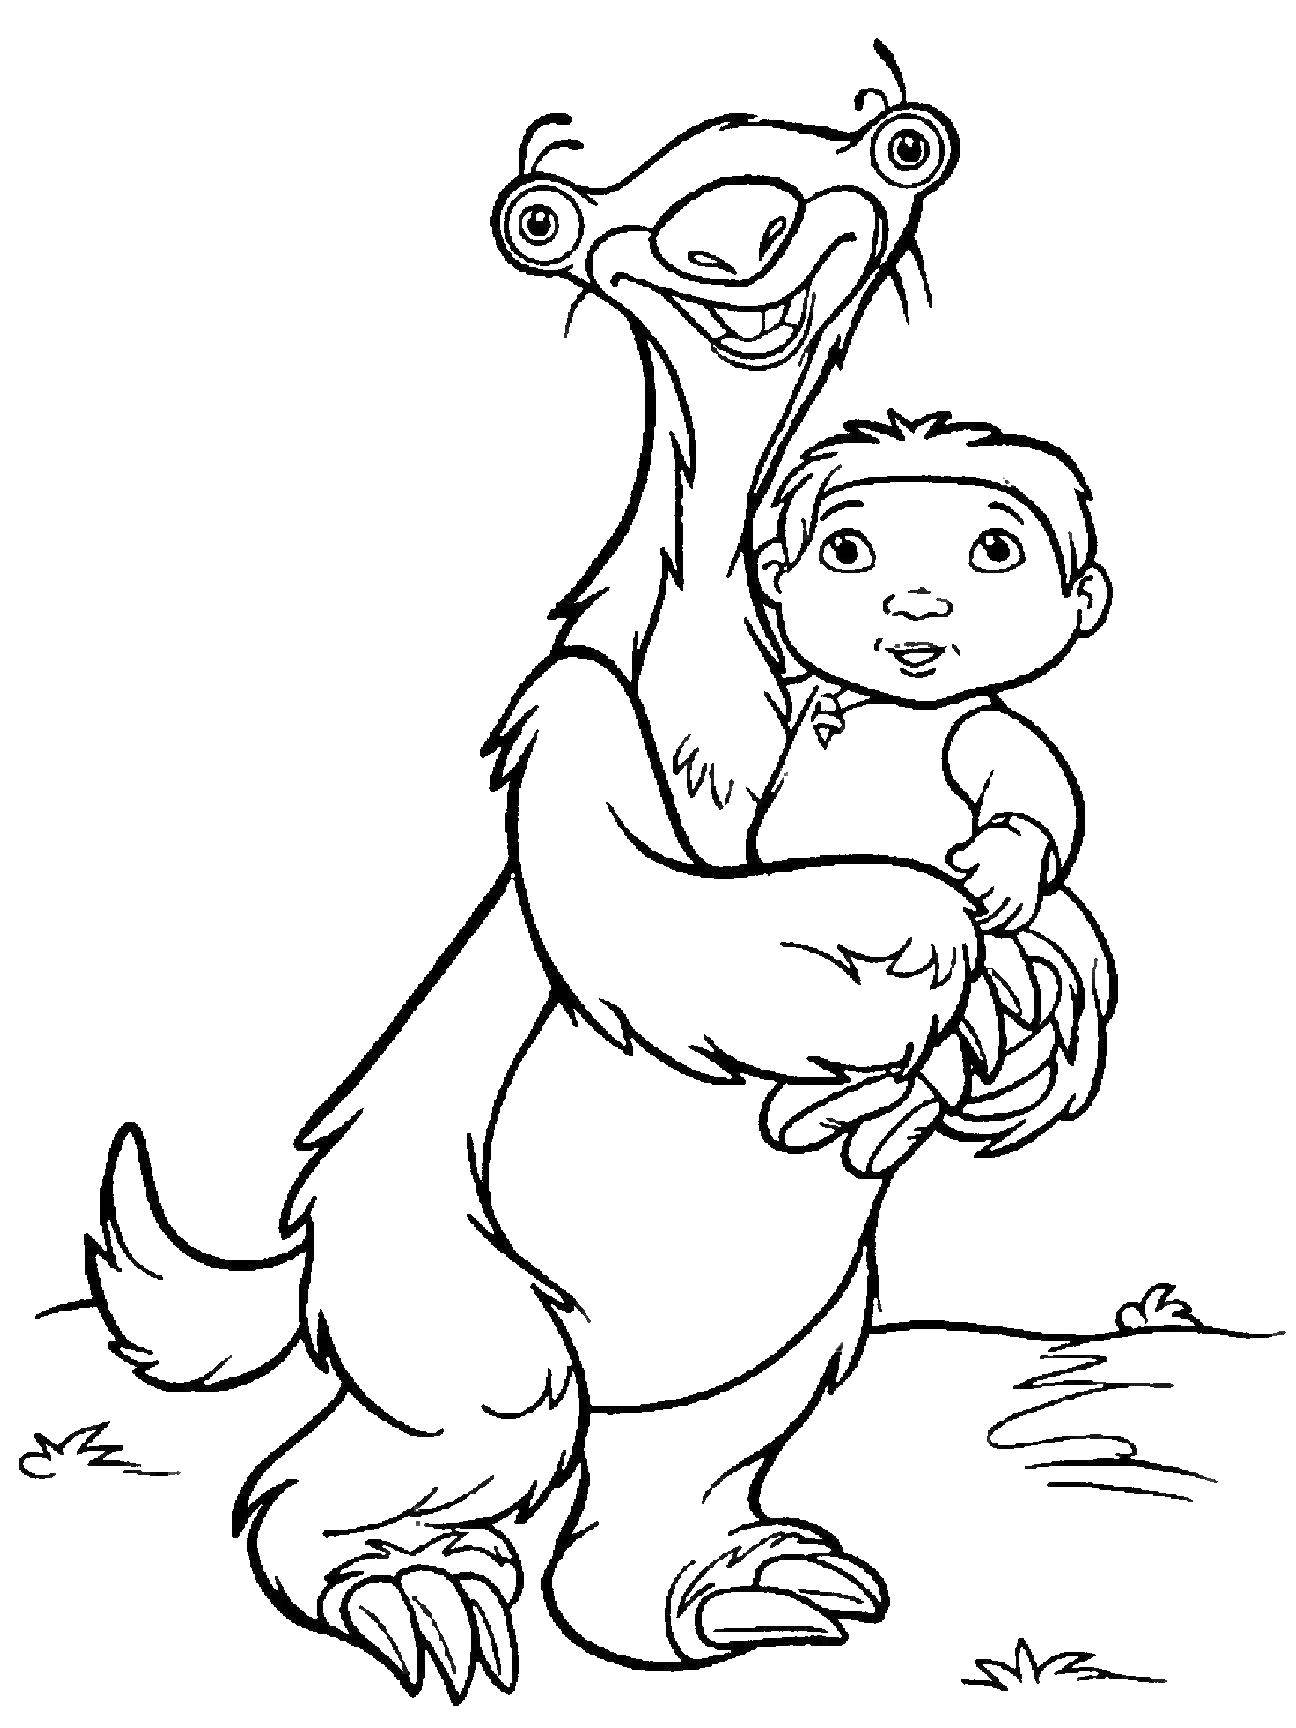 Online Coloring Pages Coloring Page The Child And Led Ice Age Download Print Coloring Page